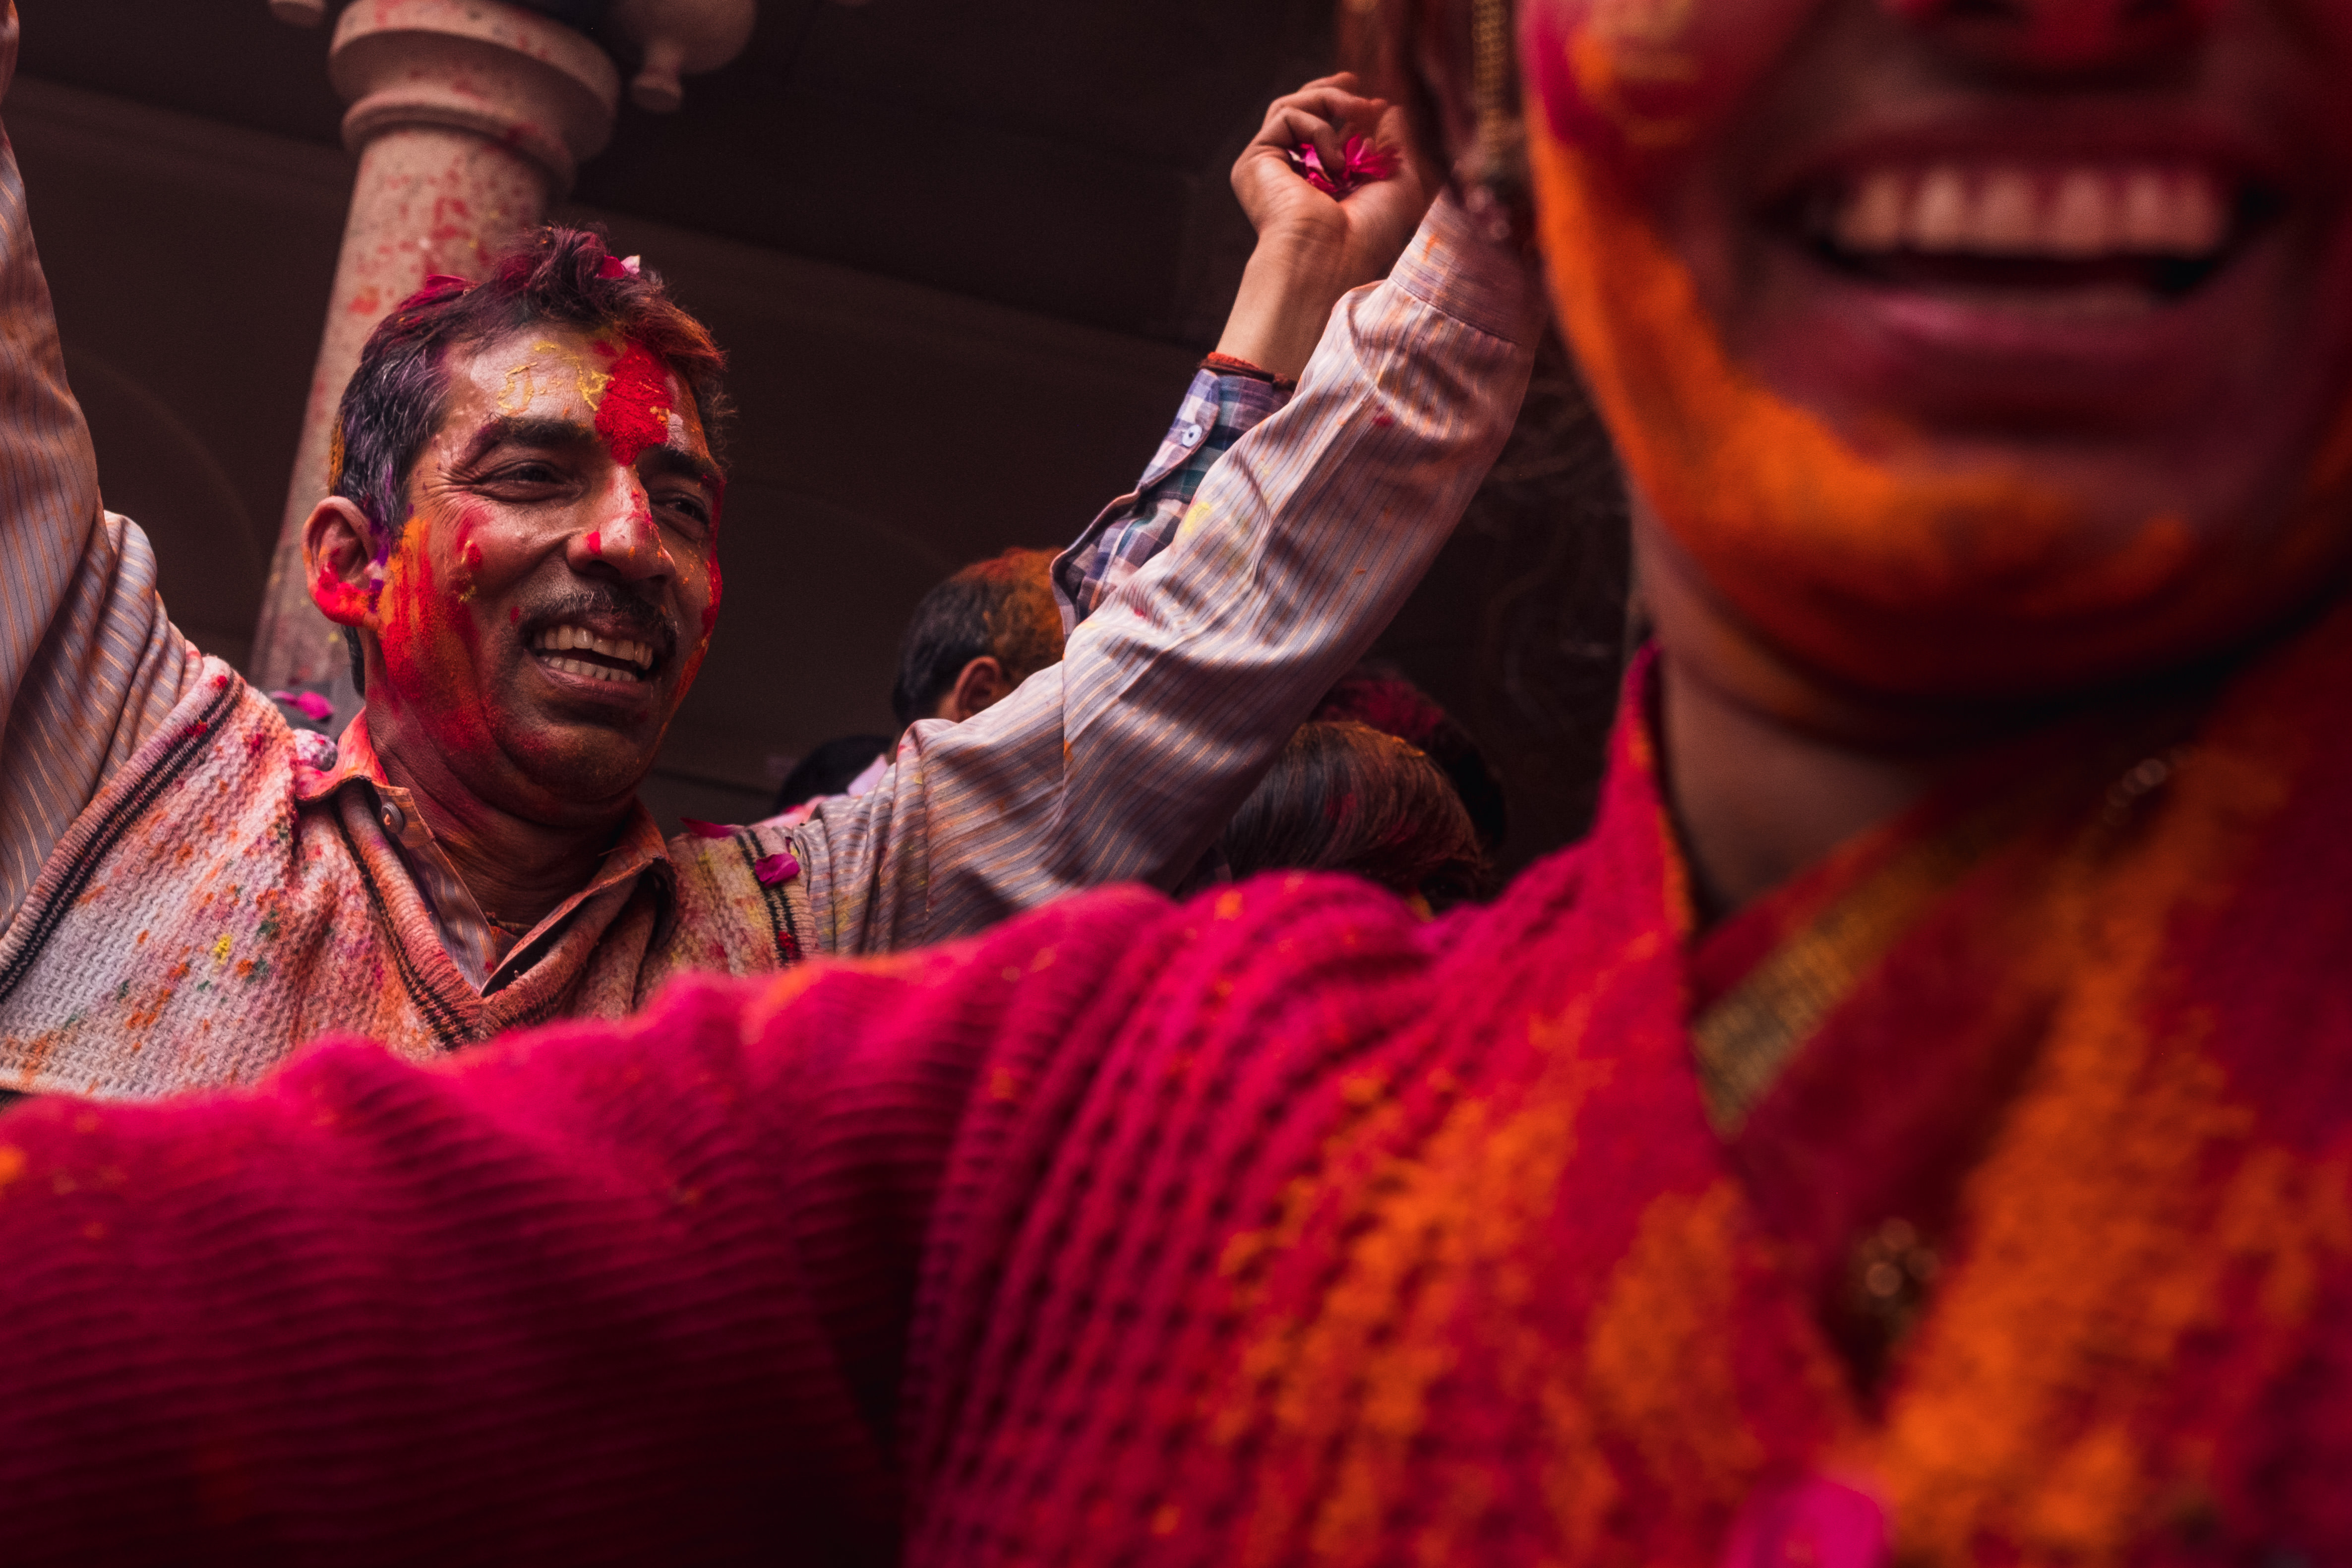 India Street Photography During Holi Festival. Man and woman laugh as the celebrate. Images by Jason Vinson